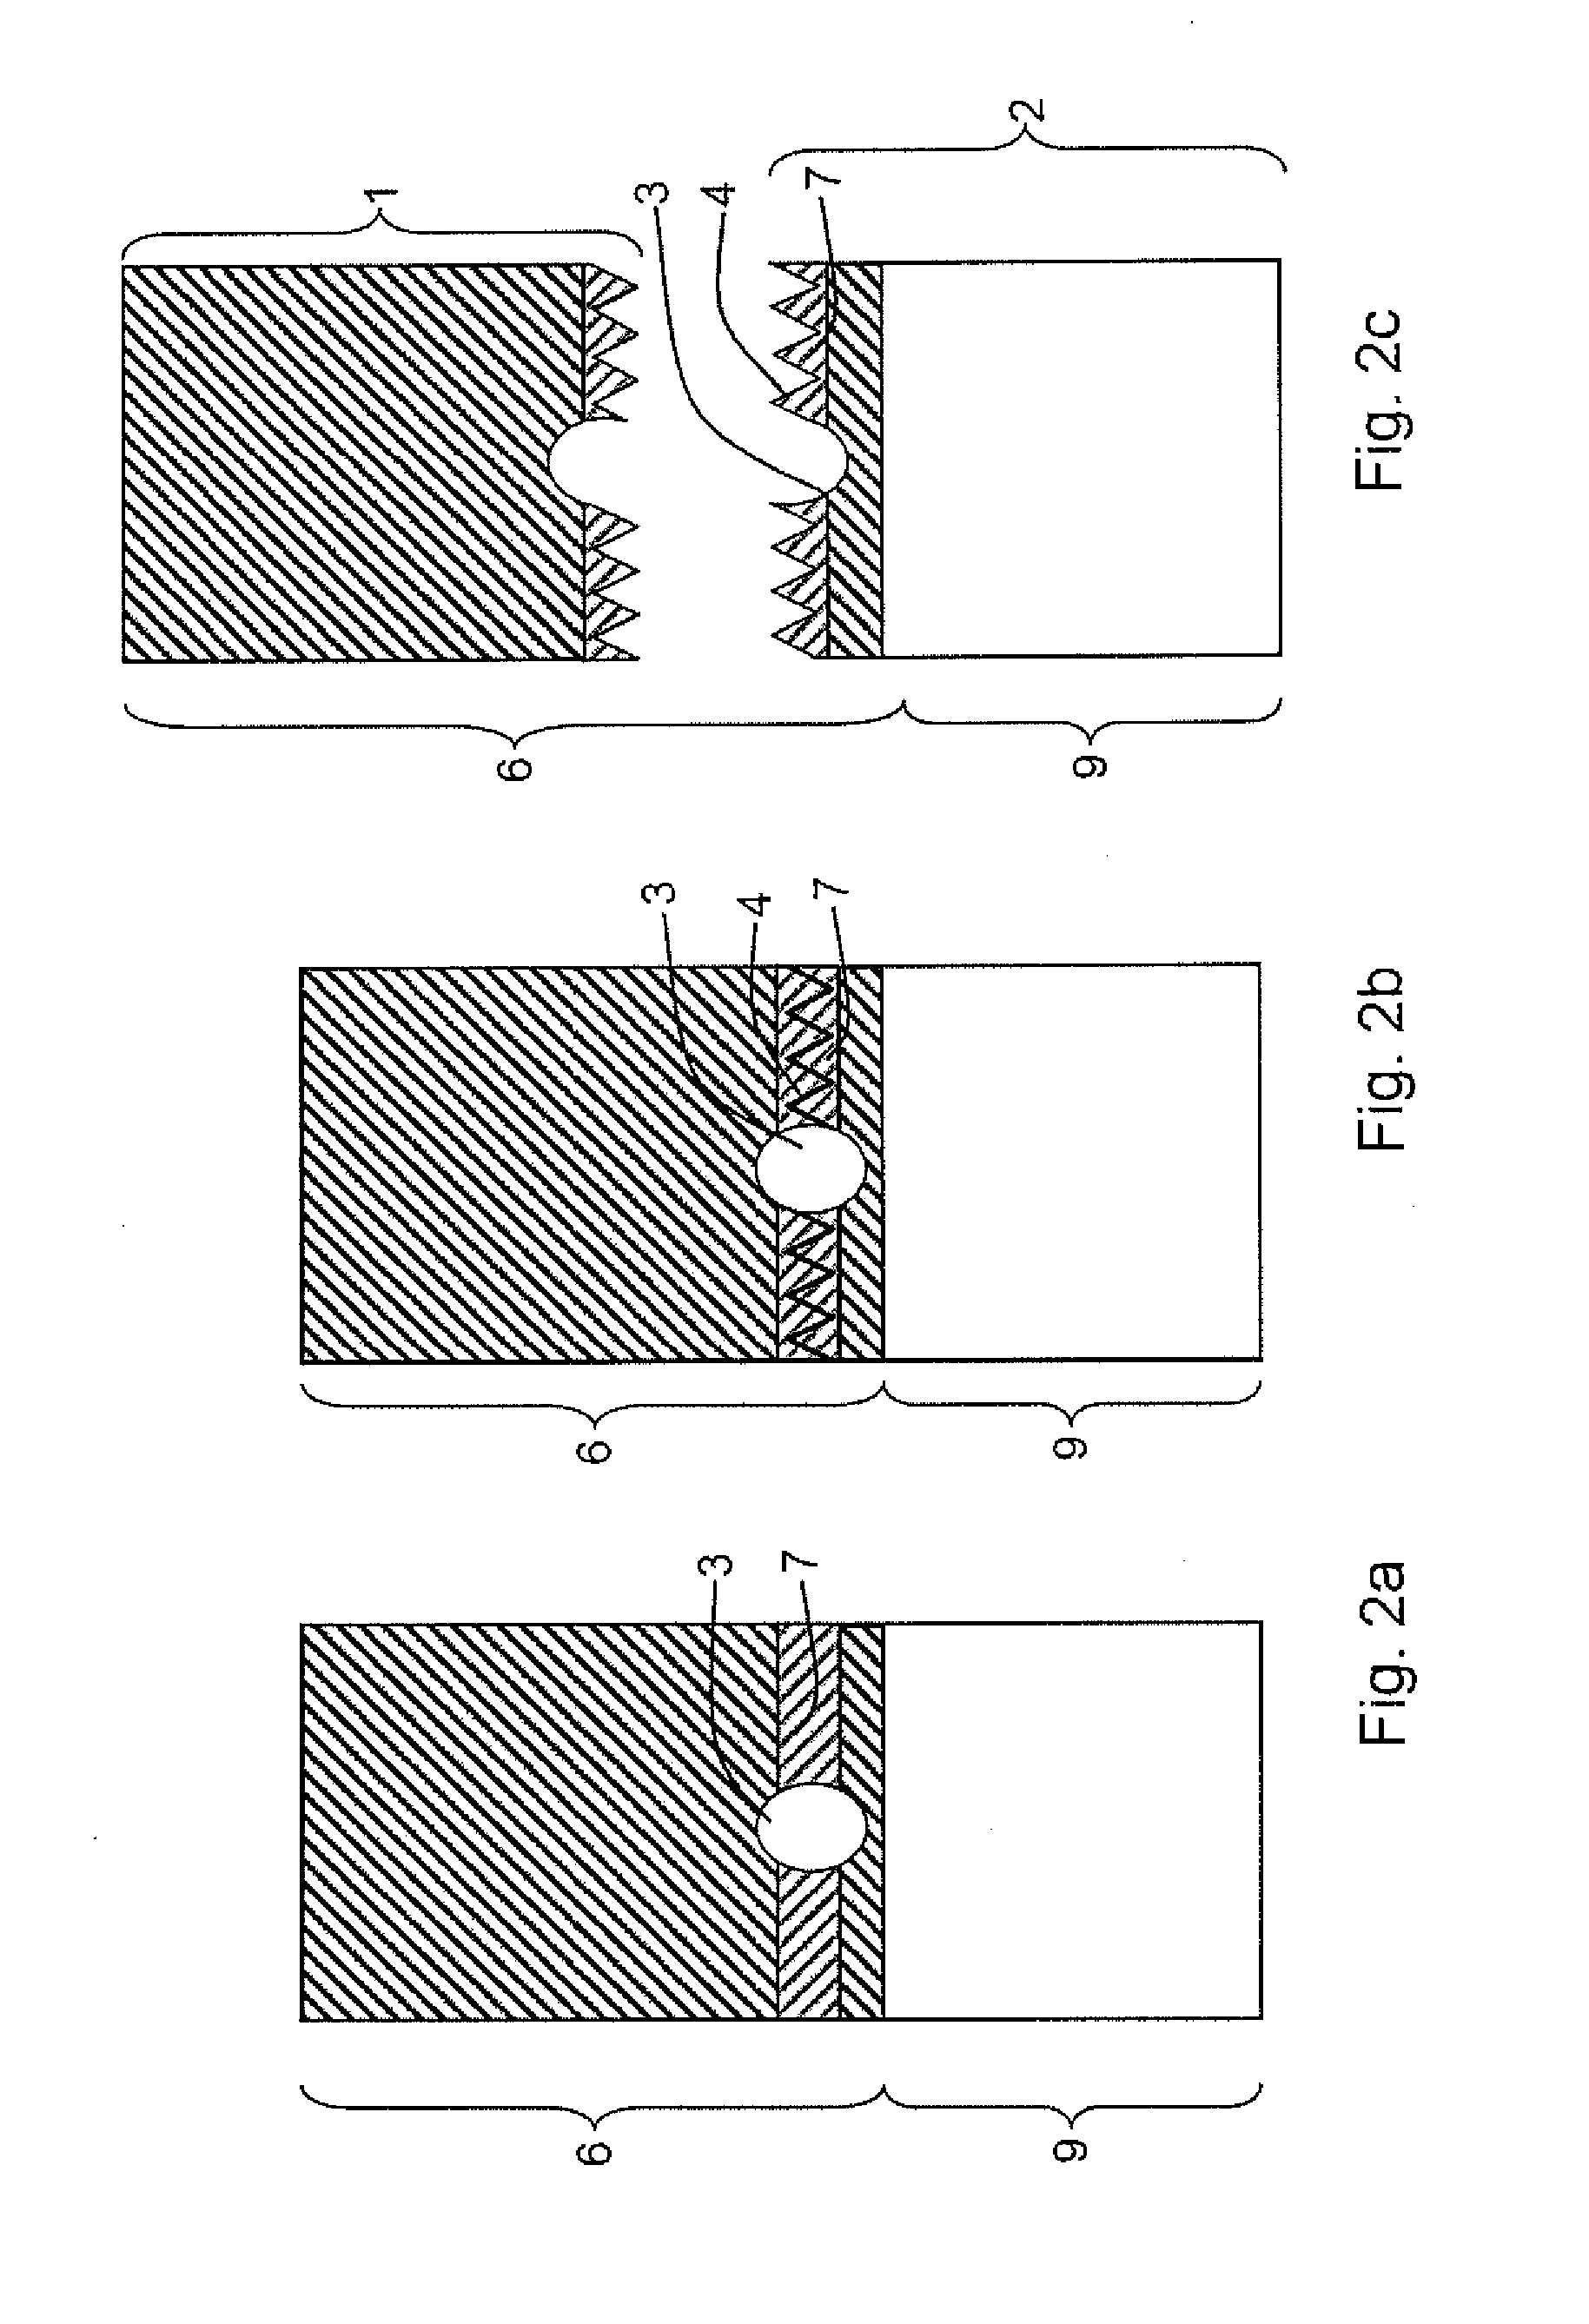 Process for Producing Metallic Components